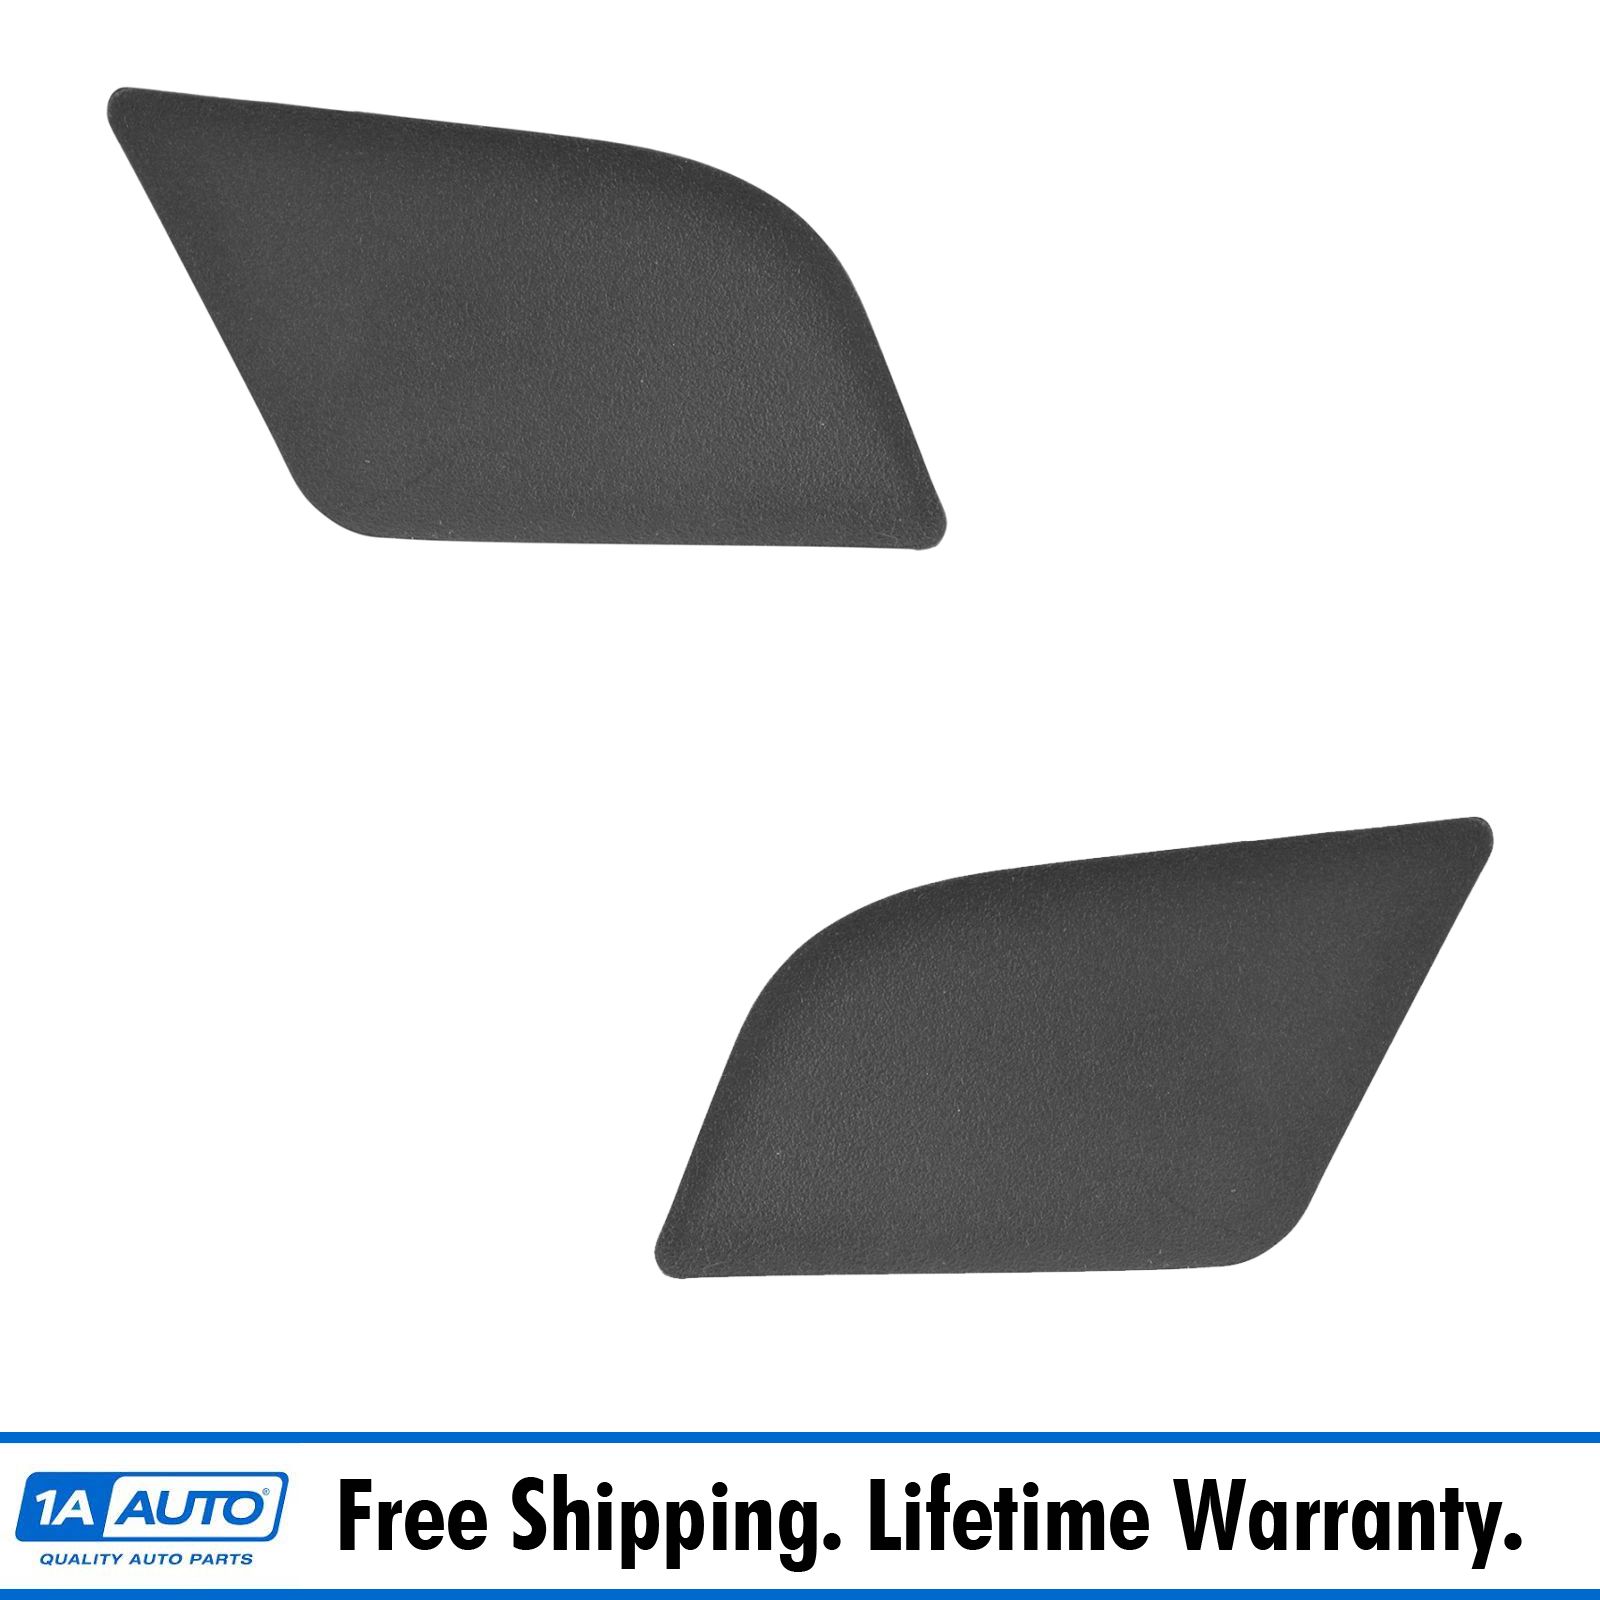 Details About Oem Interior Door Handle Bezel Bolt Hole Cover Pair Set Lh Rh For Chevy Gmc